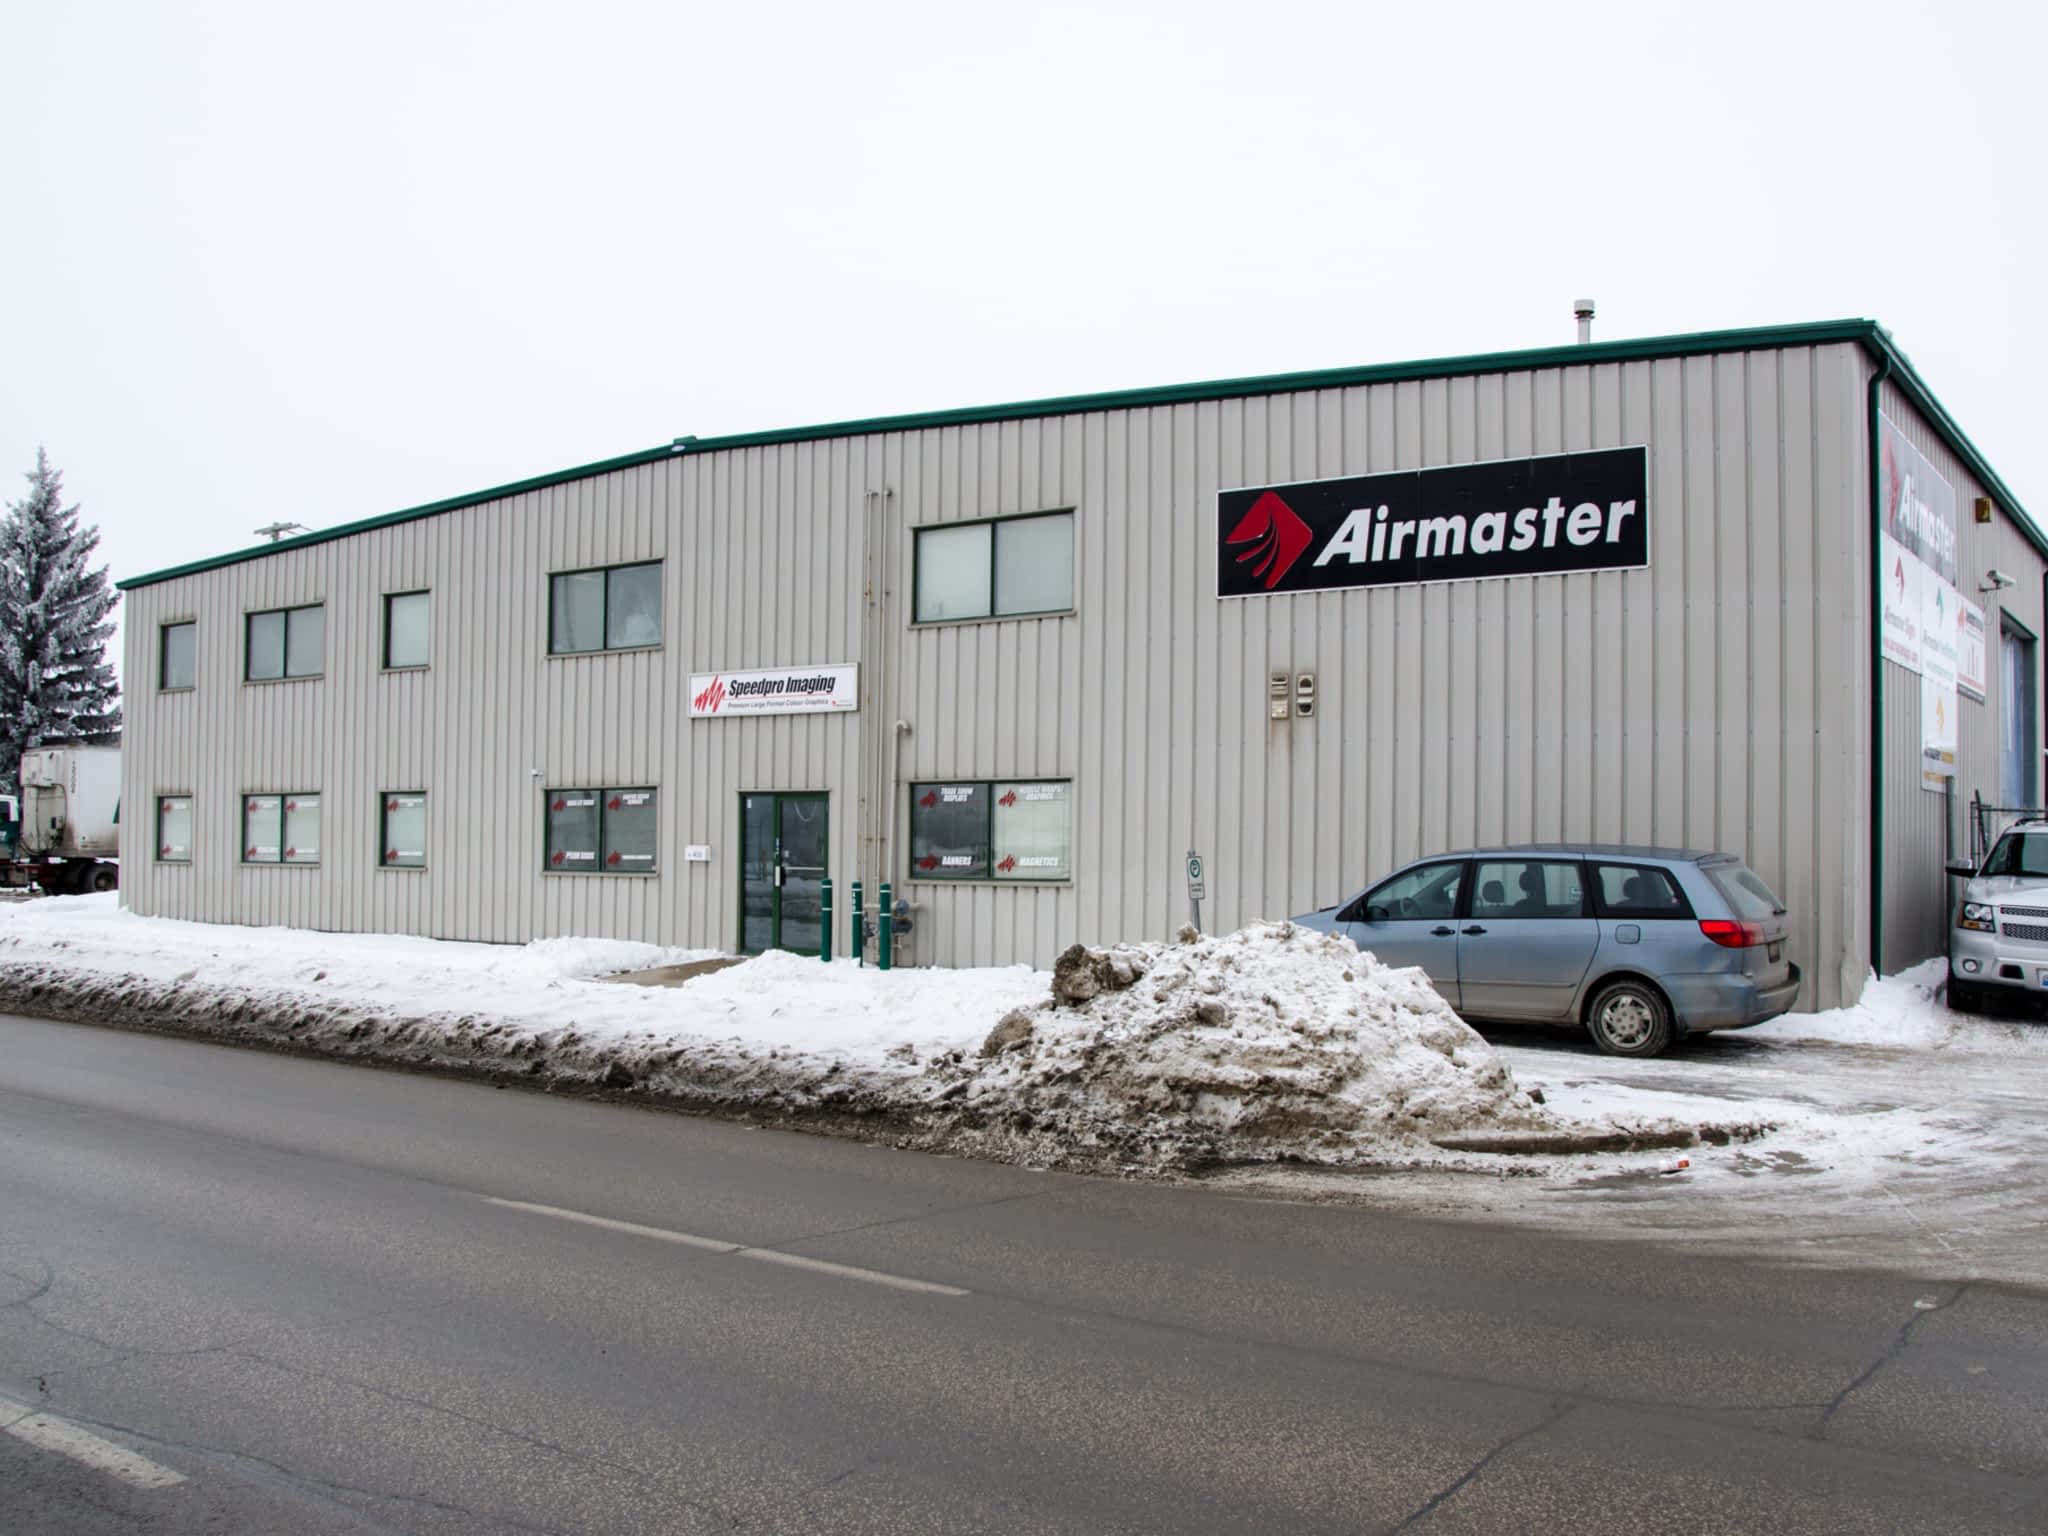 photo Airmaster Signs